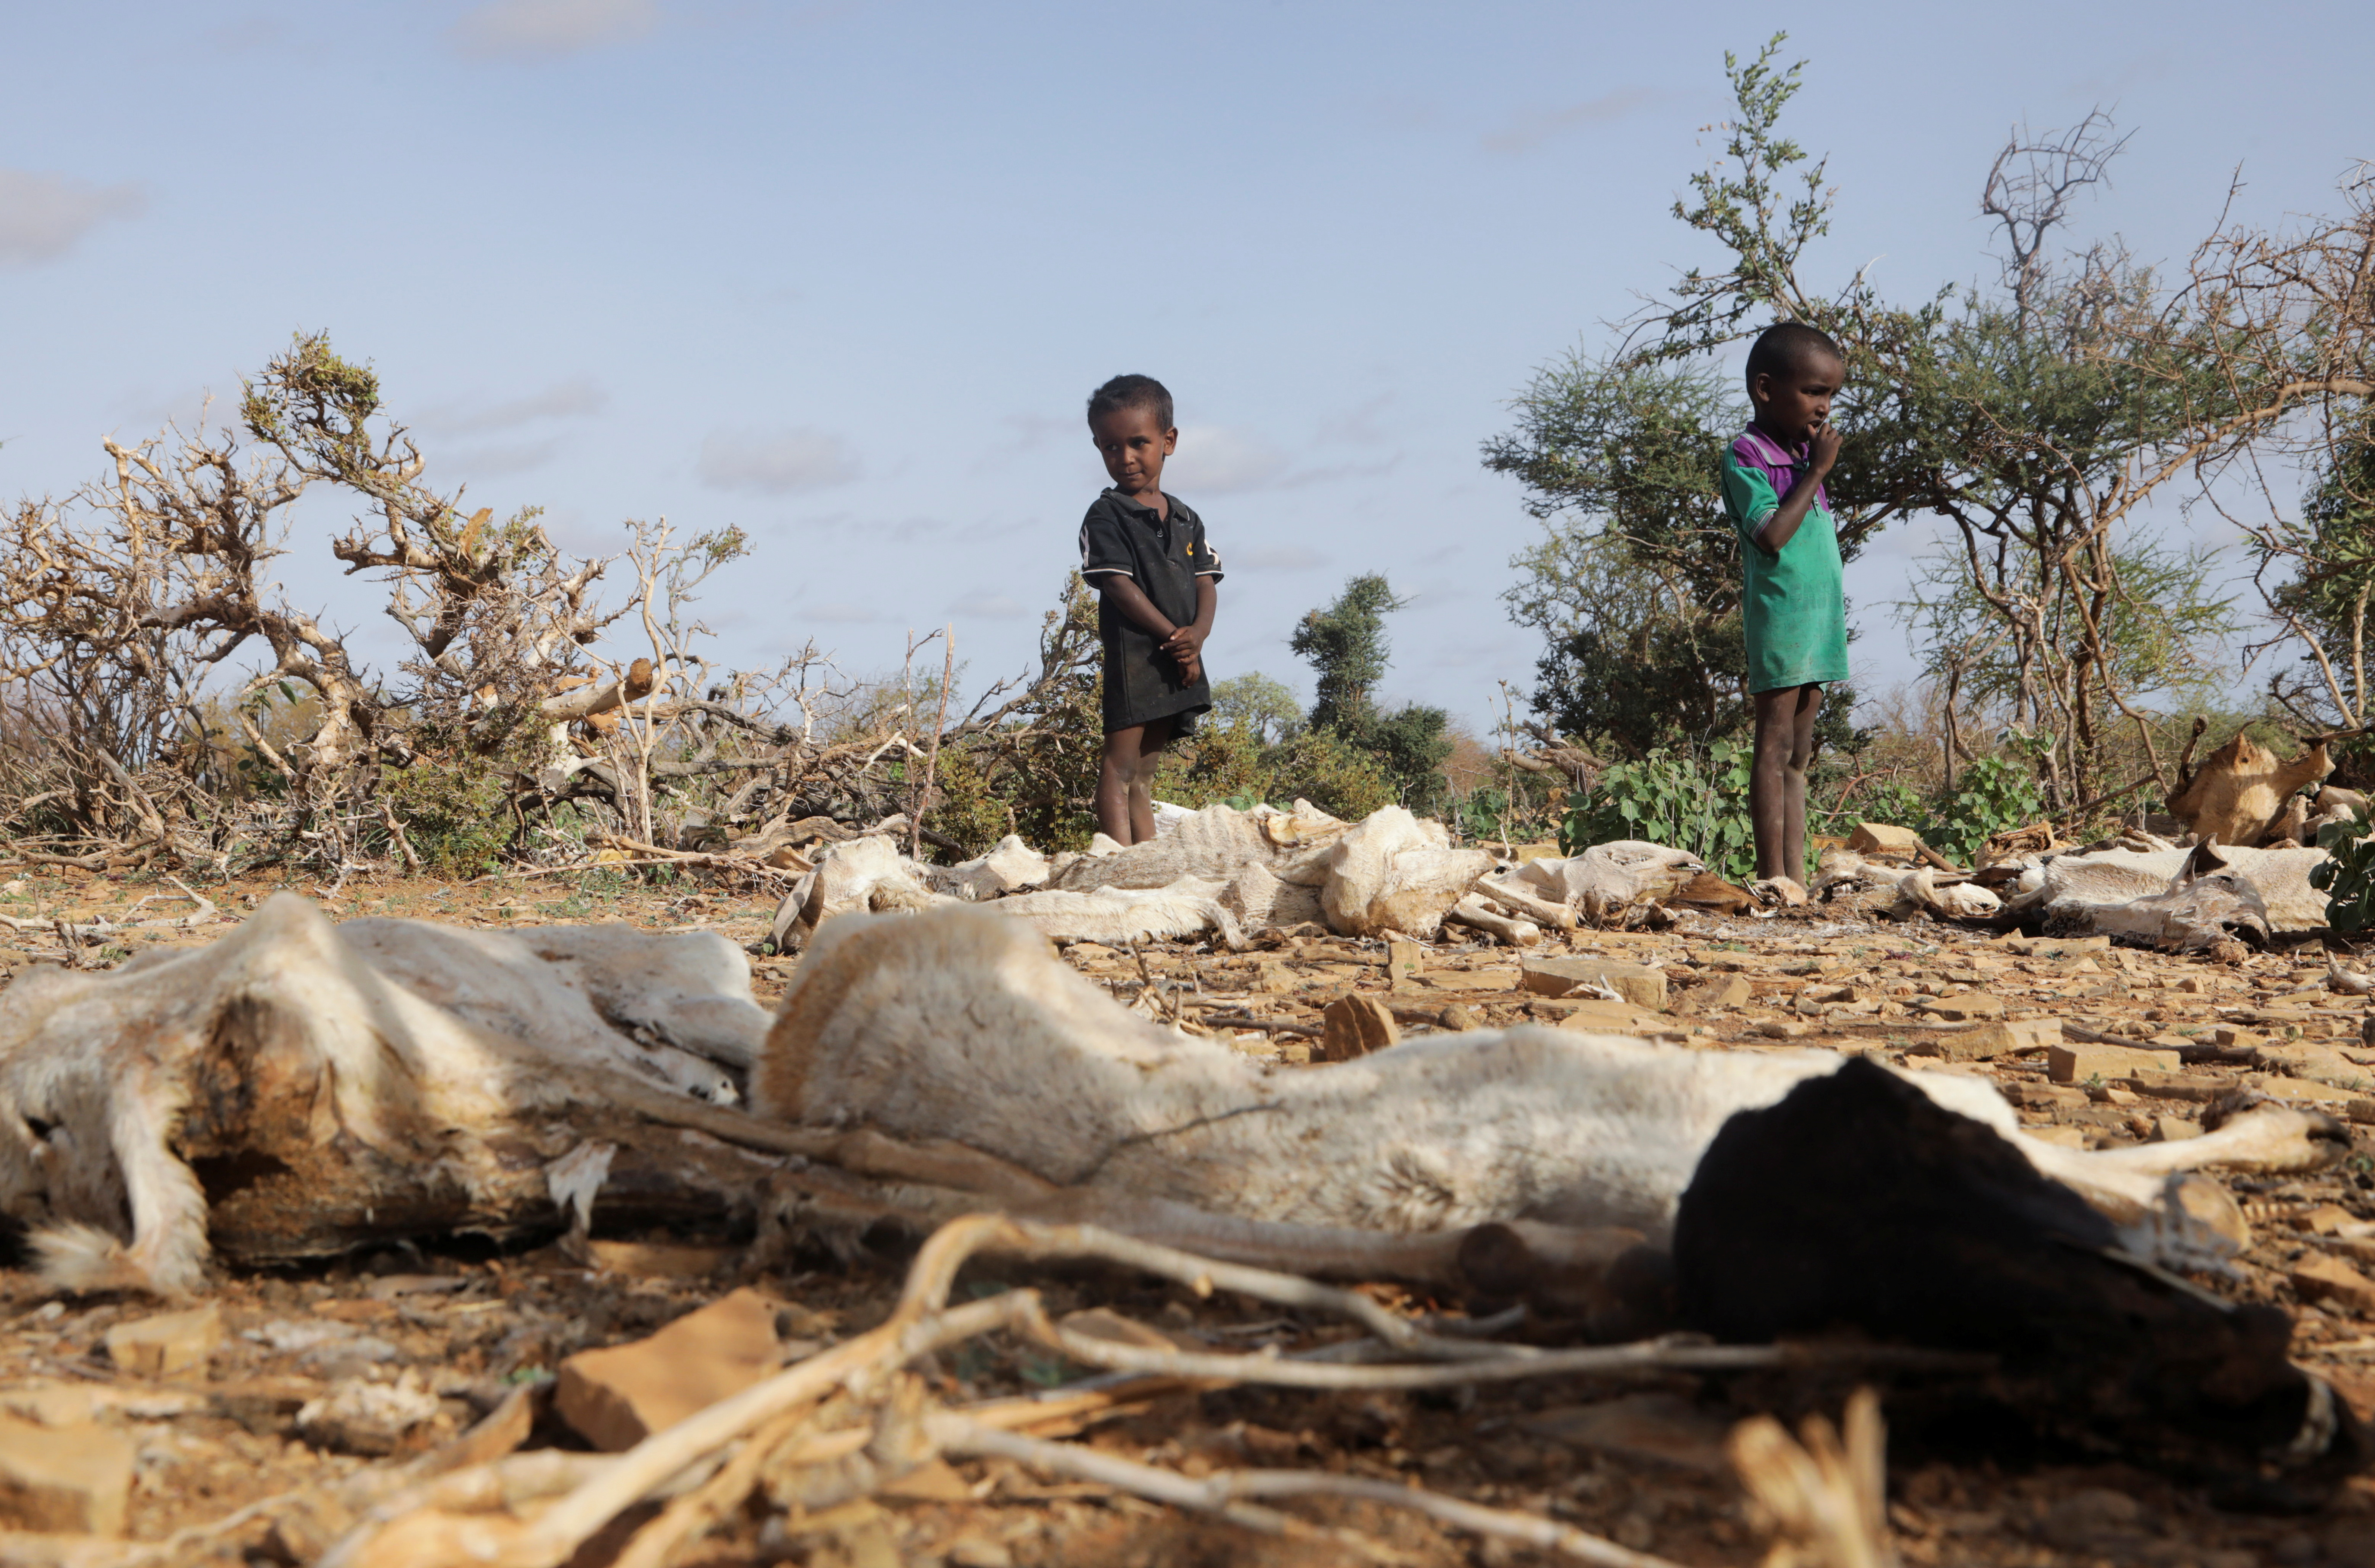 Internally displaced Somali children stand near the carcass of their dead livestock following severe droughts near Dollow, Gedo Region